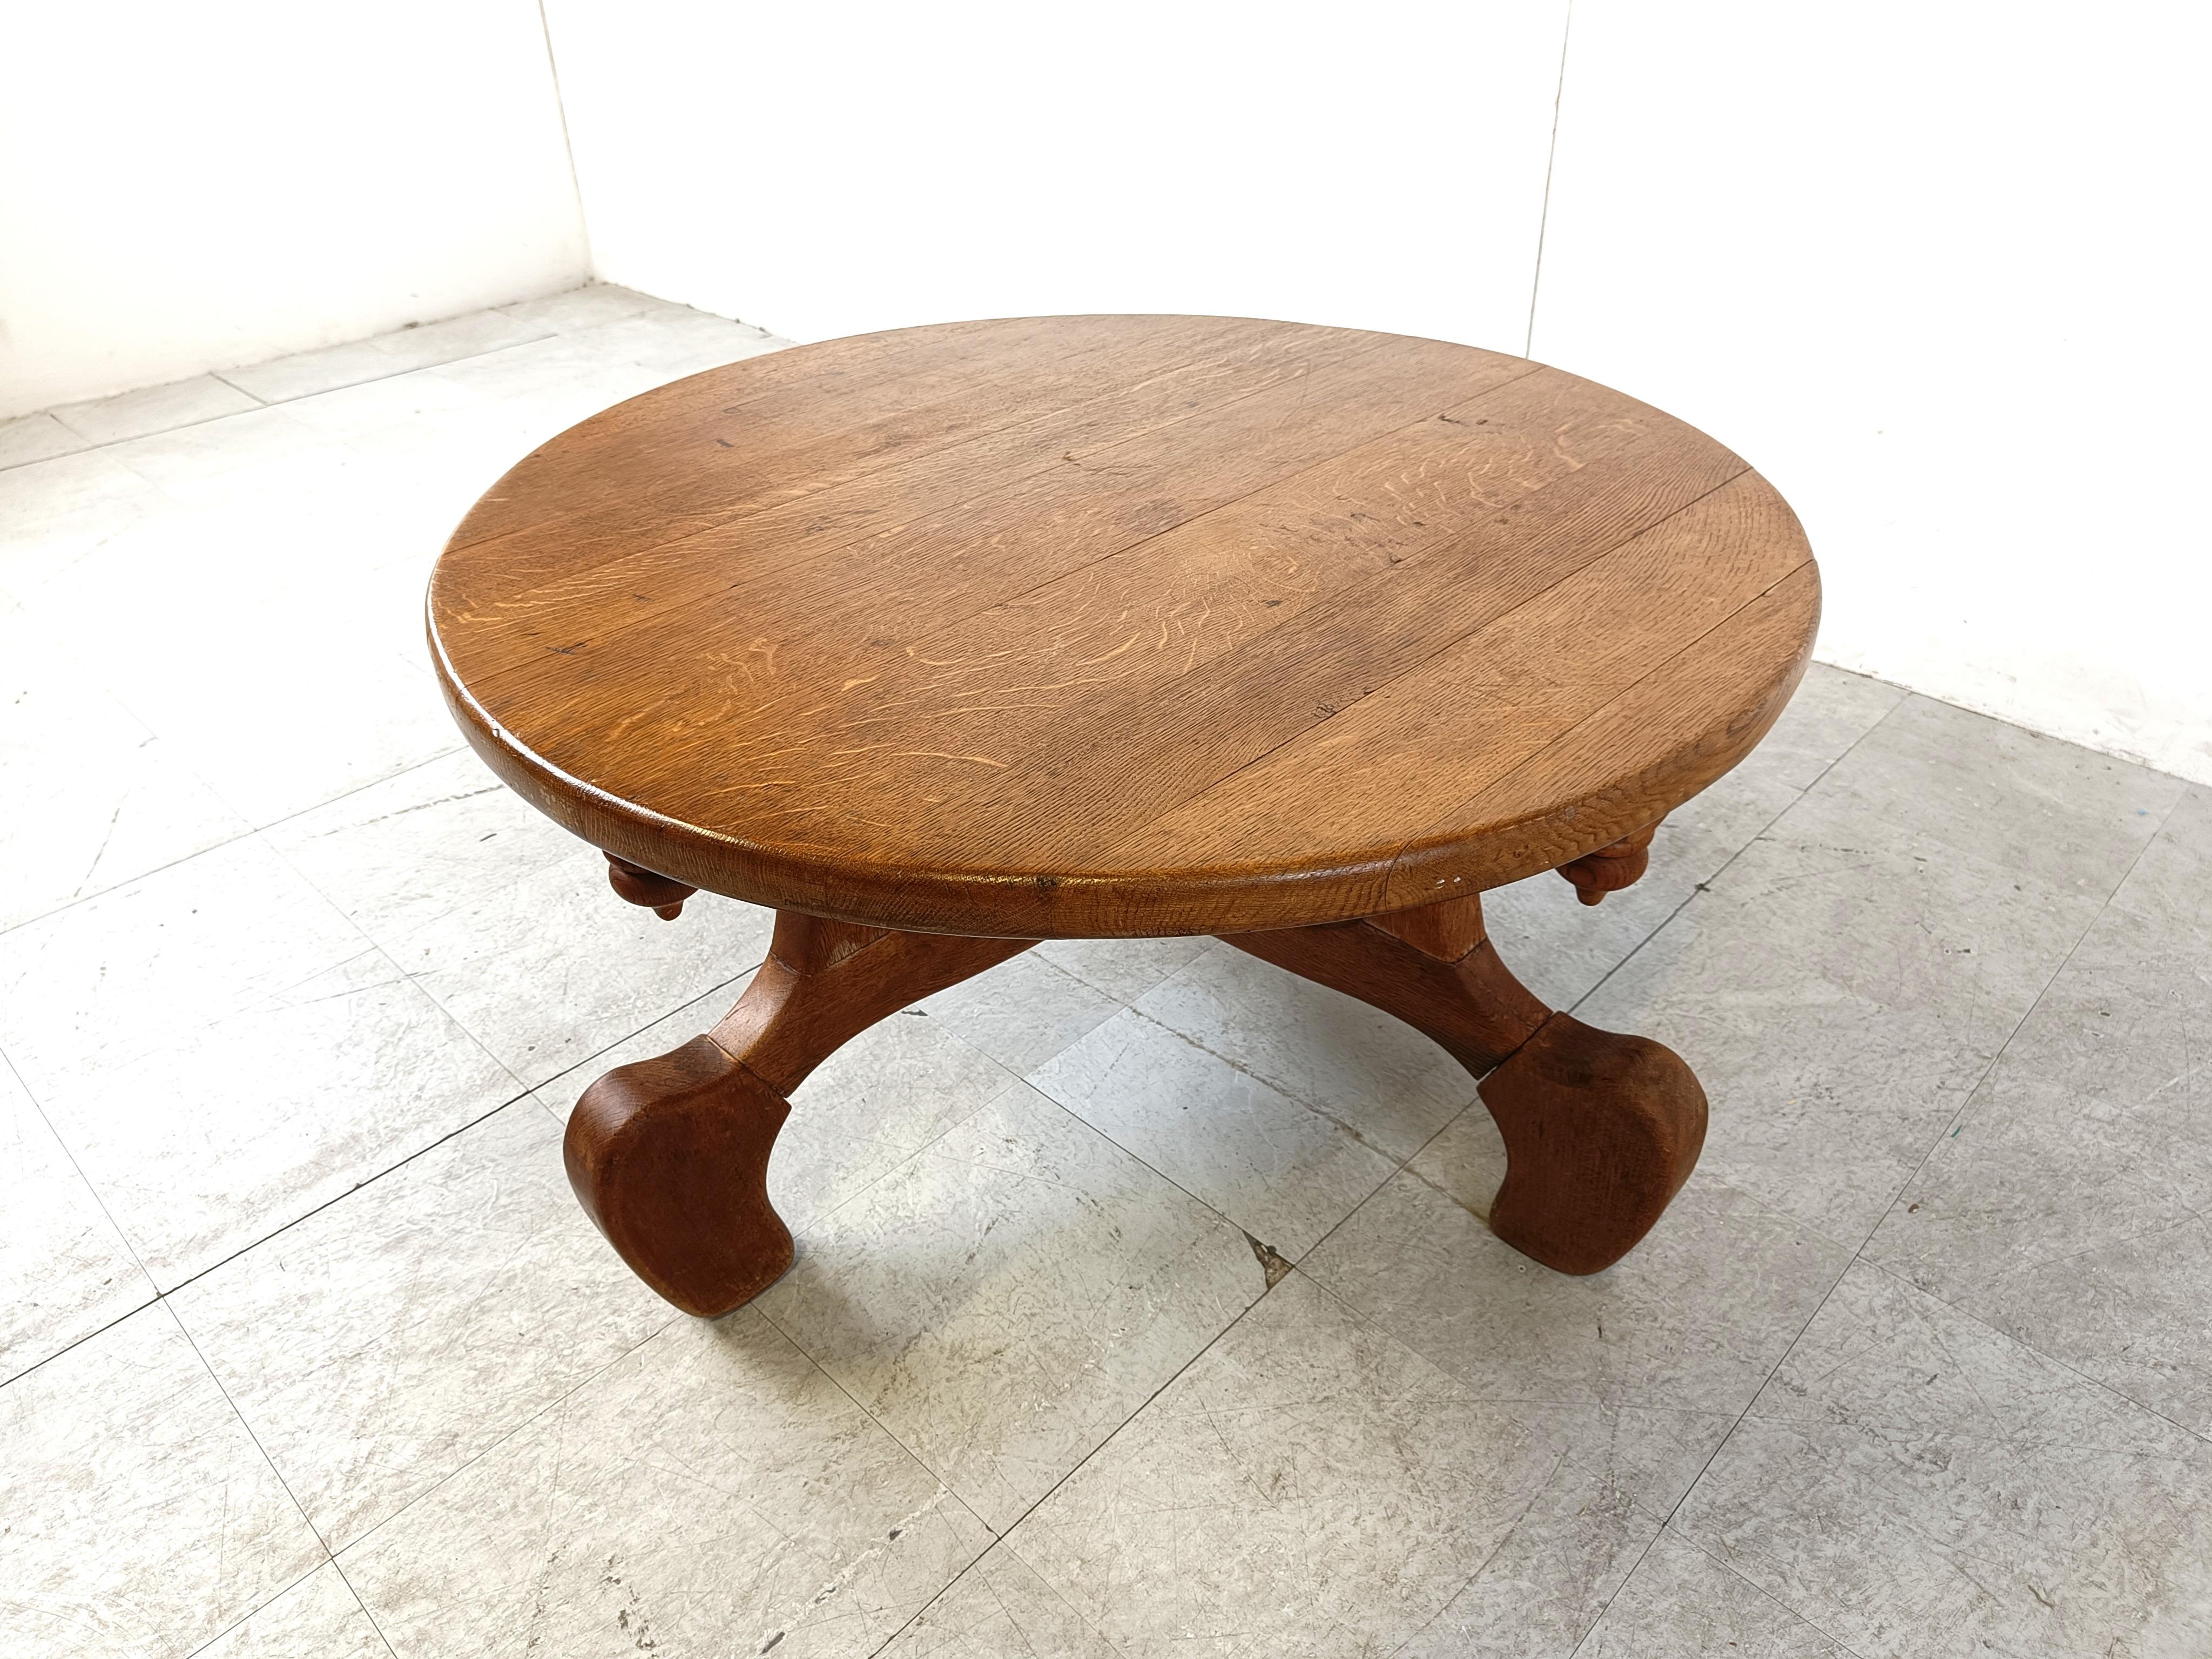 Vintage oak coffee table by Guillerme et Chambron.

Beautifully crafted coffee table with a round top and a very well made base with finials.

The curvy and finely crafted base makes this piece very elegant.

1960s France

Very good